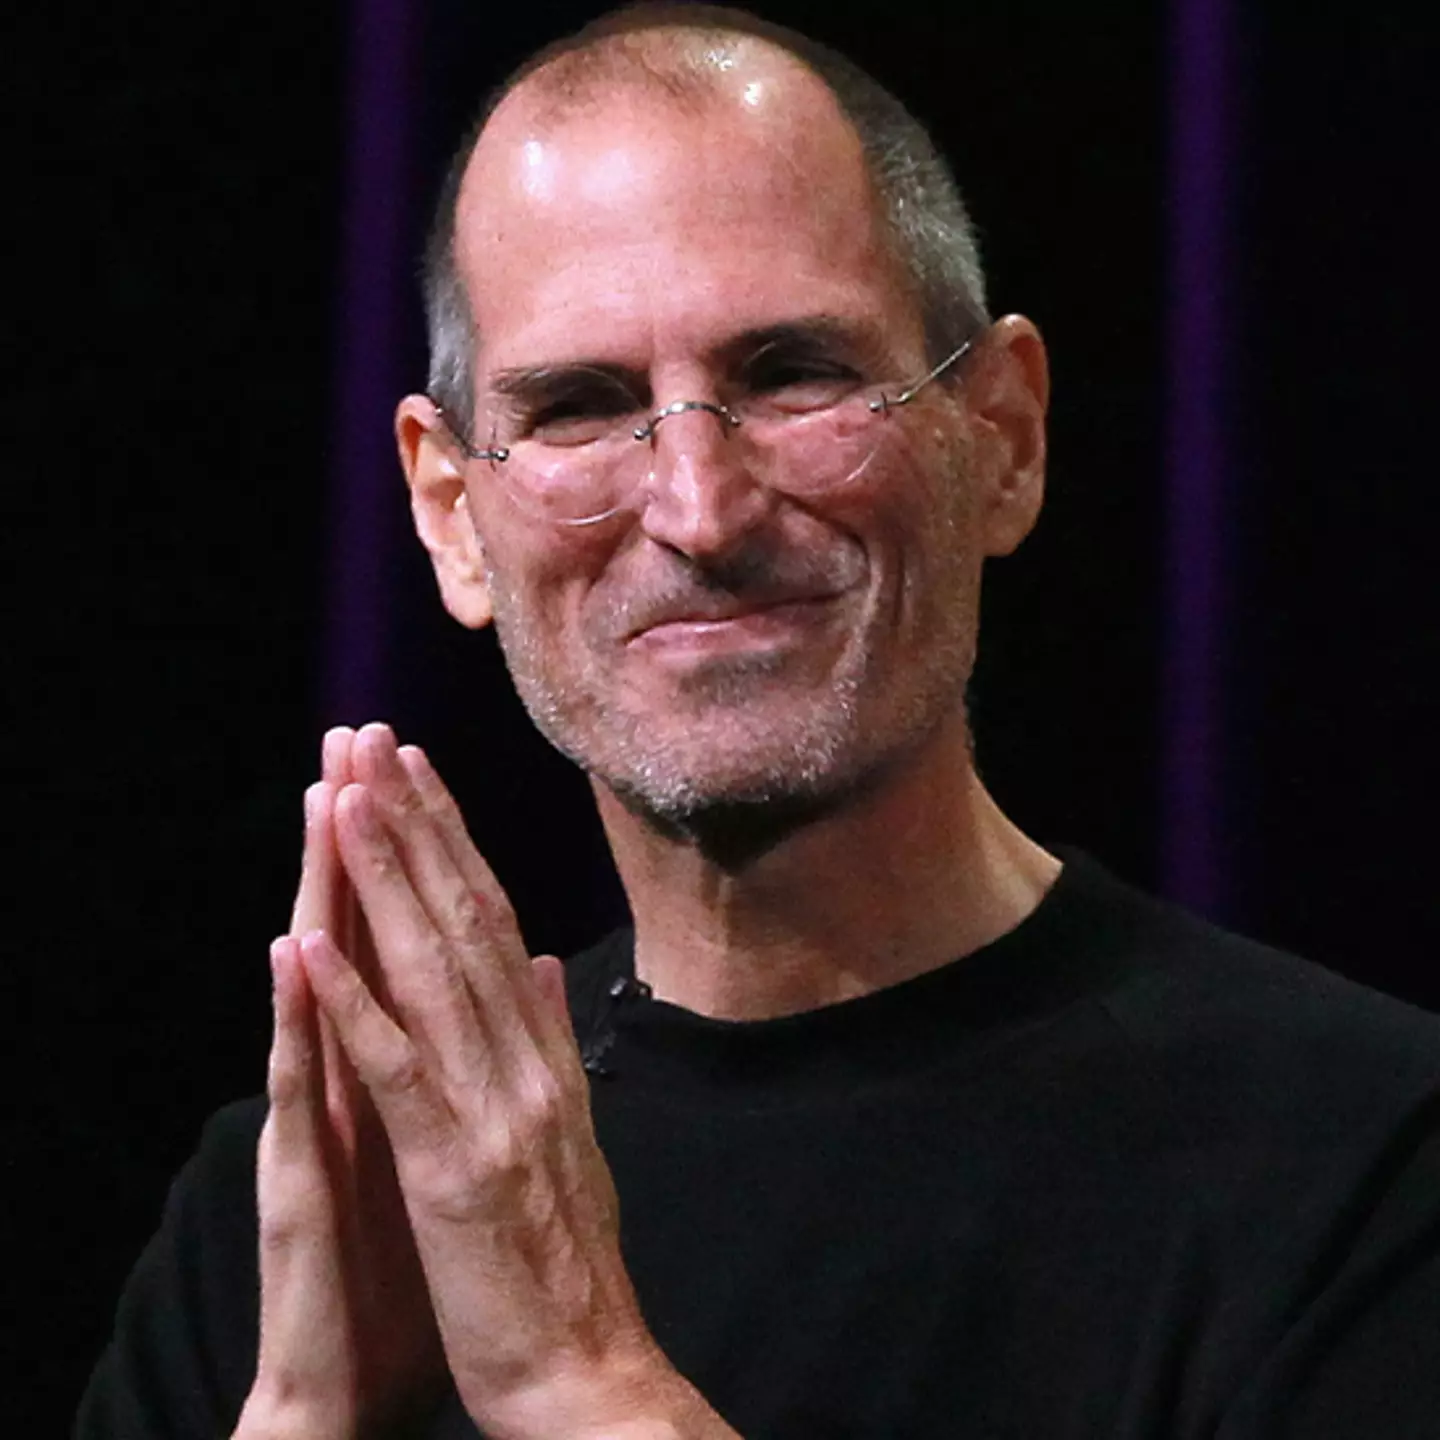 Apple co-founder Steve Jobs had a 'beer test' he would use for interviewing people at company